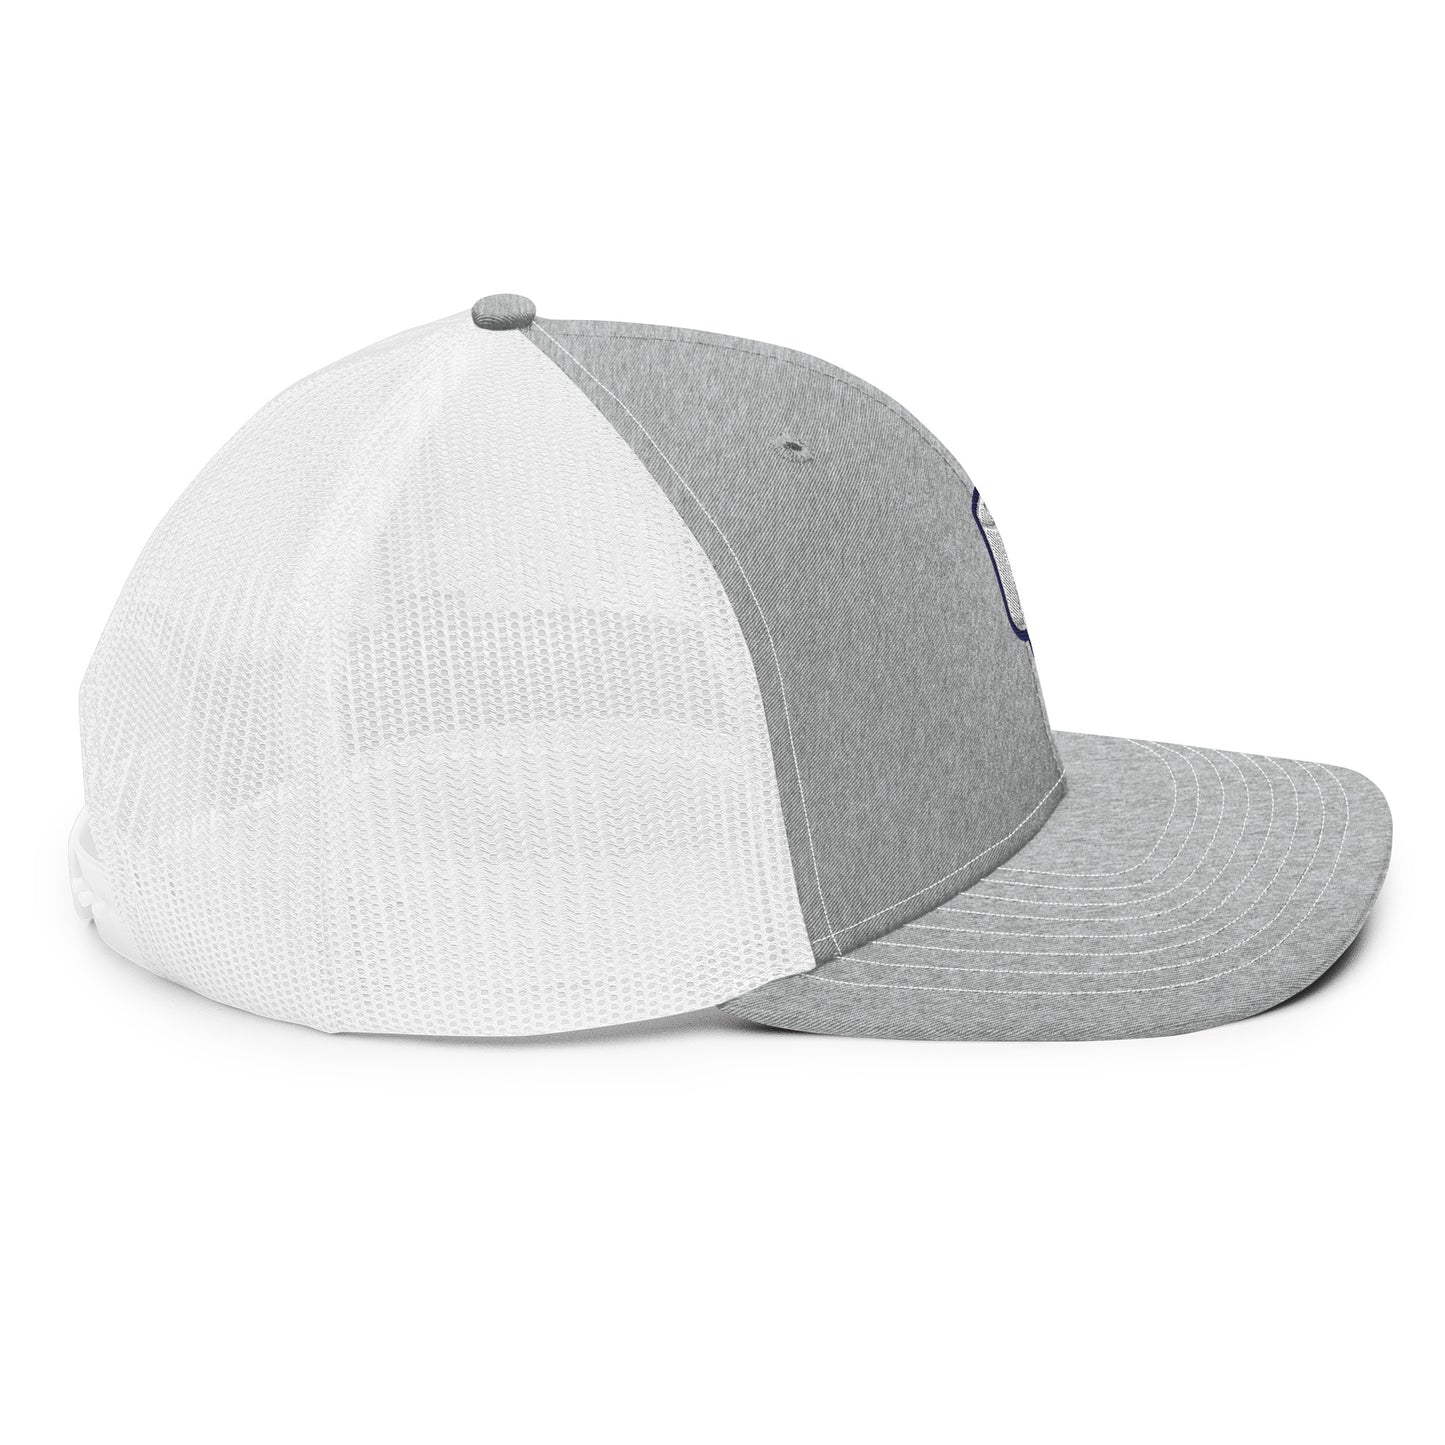 Gray Snapback Trucker Hat - The Large Roll